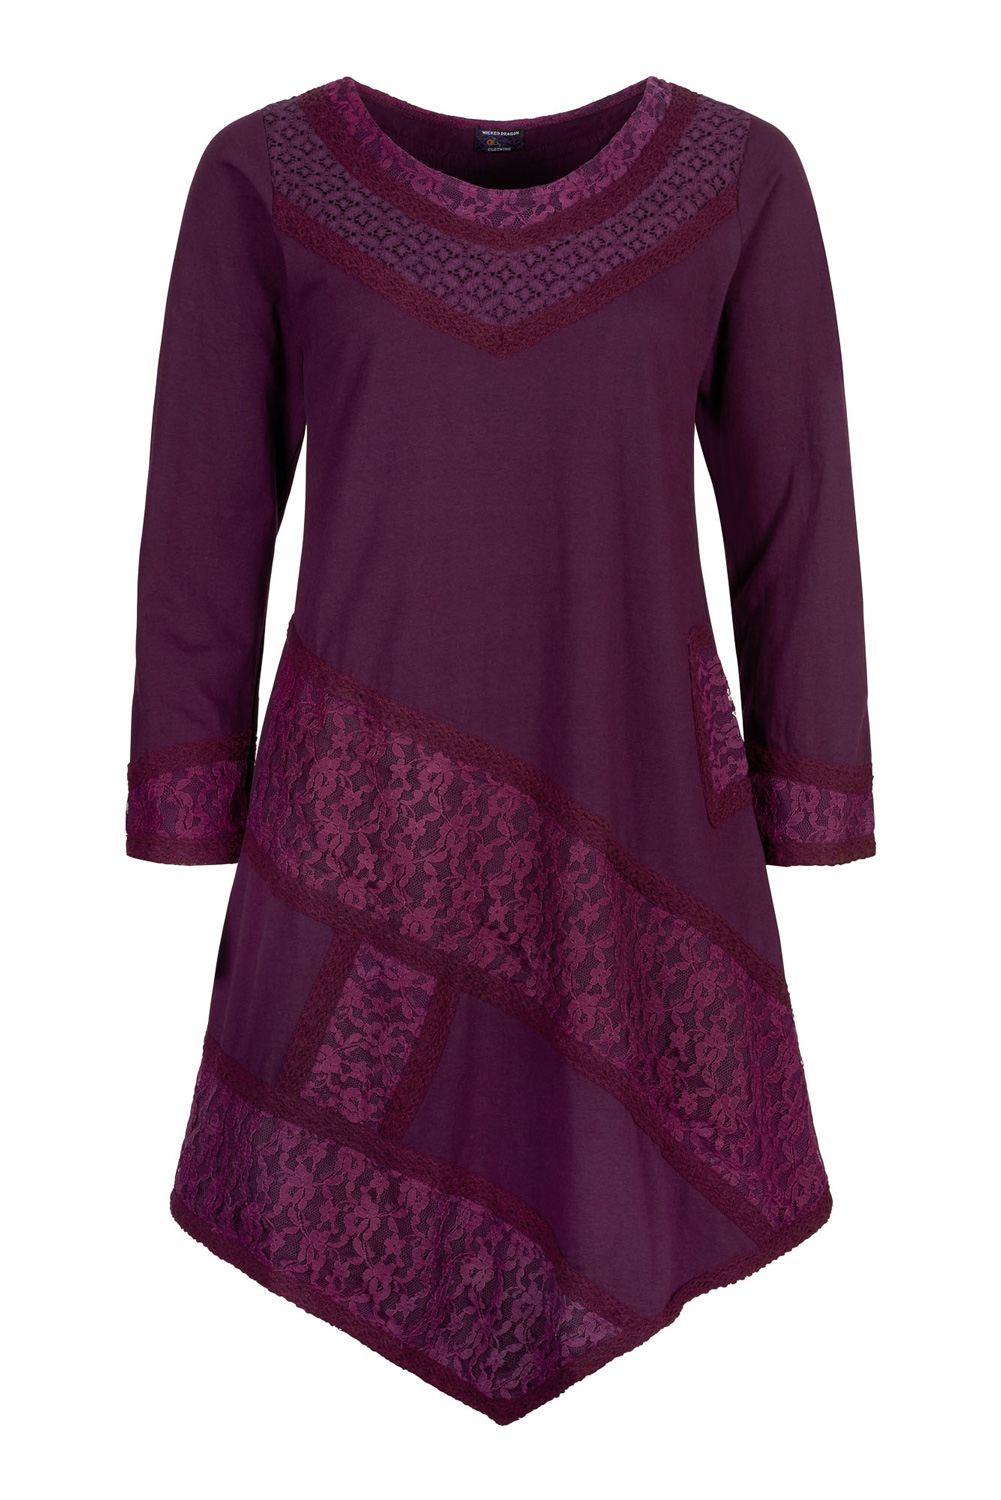 Wicked Dragon Clothing - Lace and crochet long sleeve dress